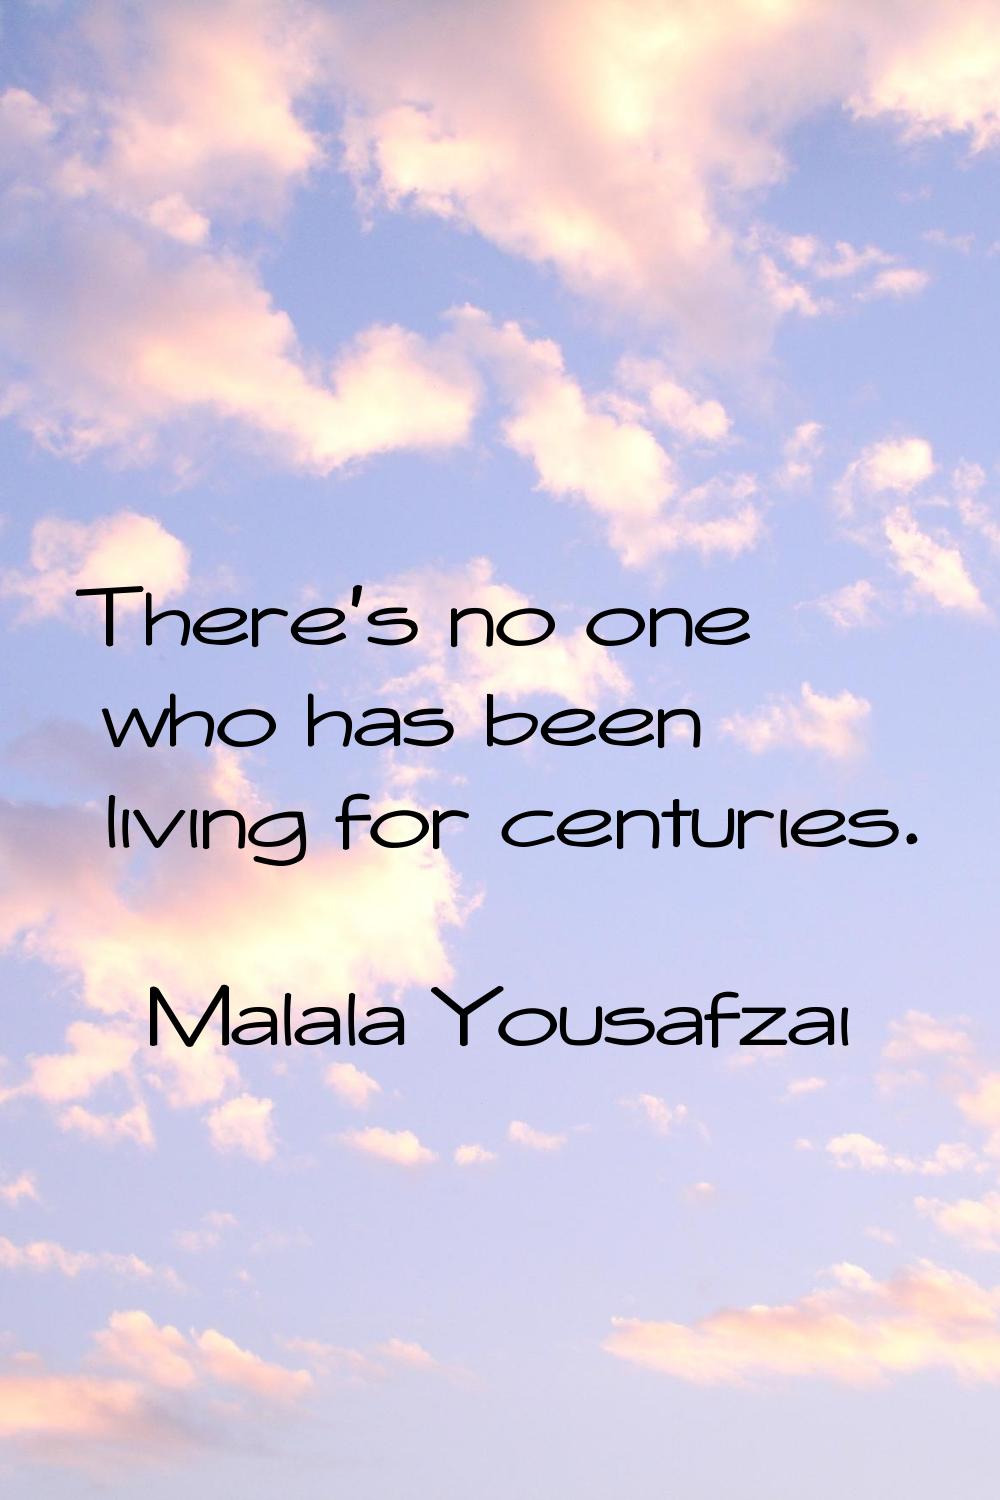 There's no one who has been living for centuries.